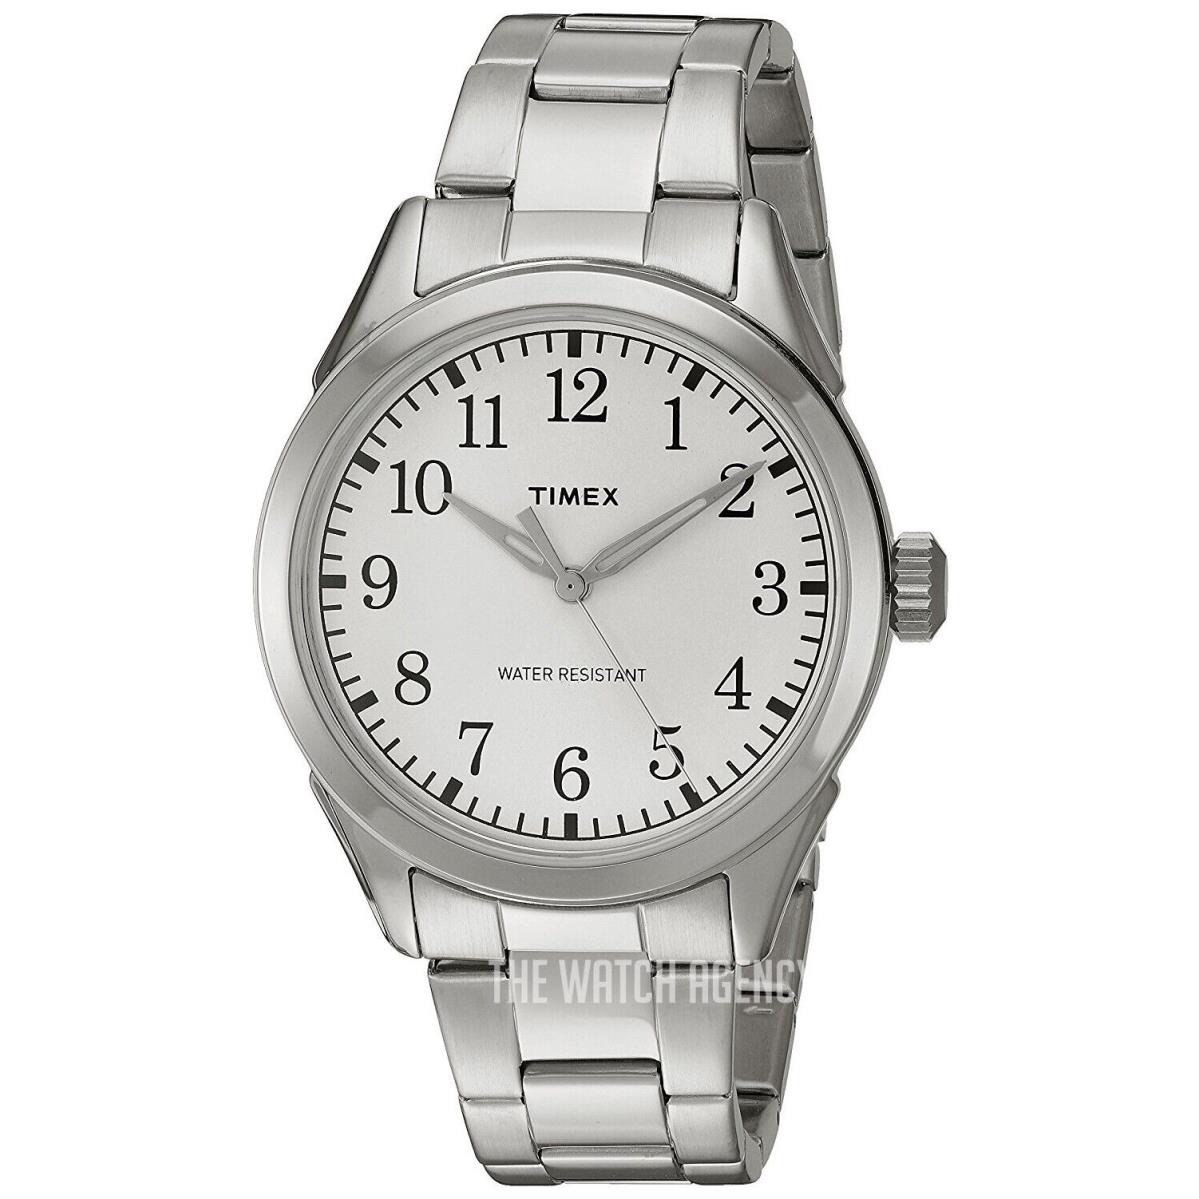 Timex Briarwood Terrace Stainless Steel Band Men s Watch TW2P99800 - Dial: Silver-Tone, Band: Silver-Tone, Bezel: White